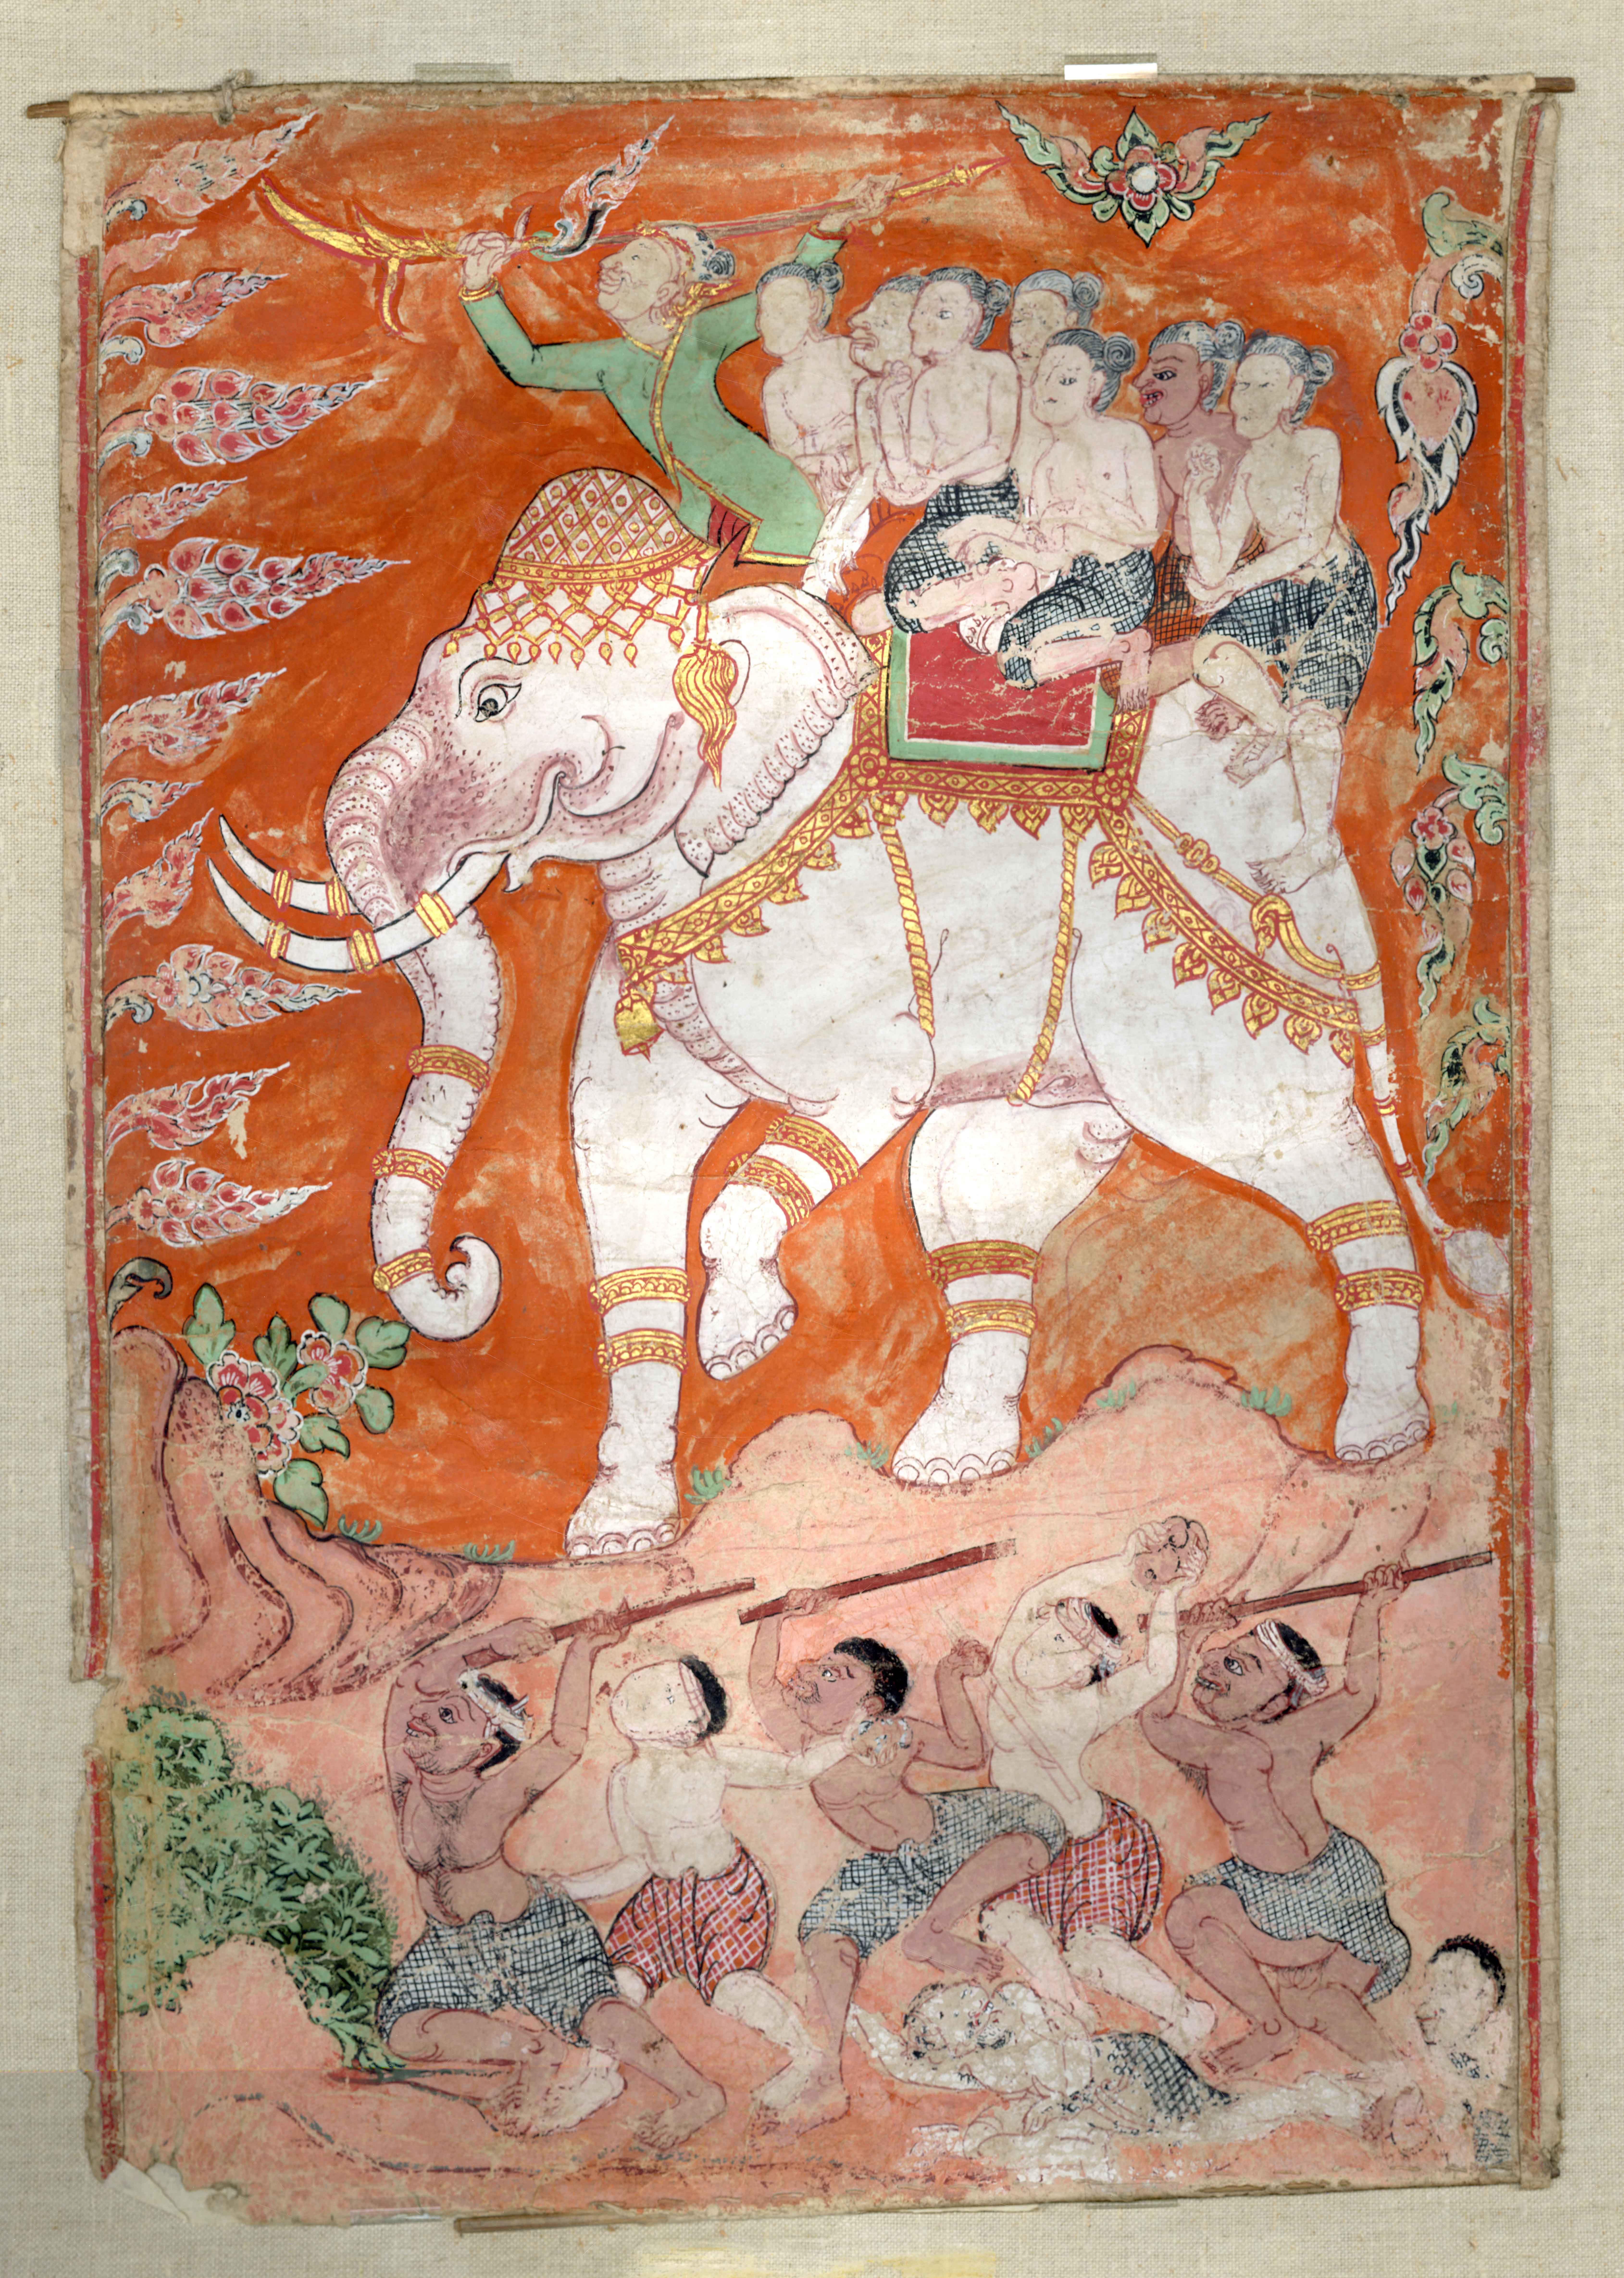 An elephant carries several figures with a figure wearing green attire and carrying something gold sitting in front. In the foreground, there are several more figures with raised arms carrying what look like sticks. 